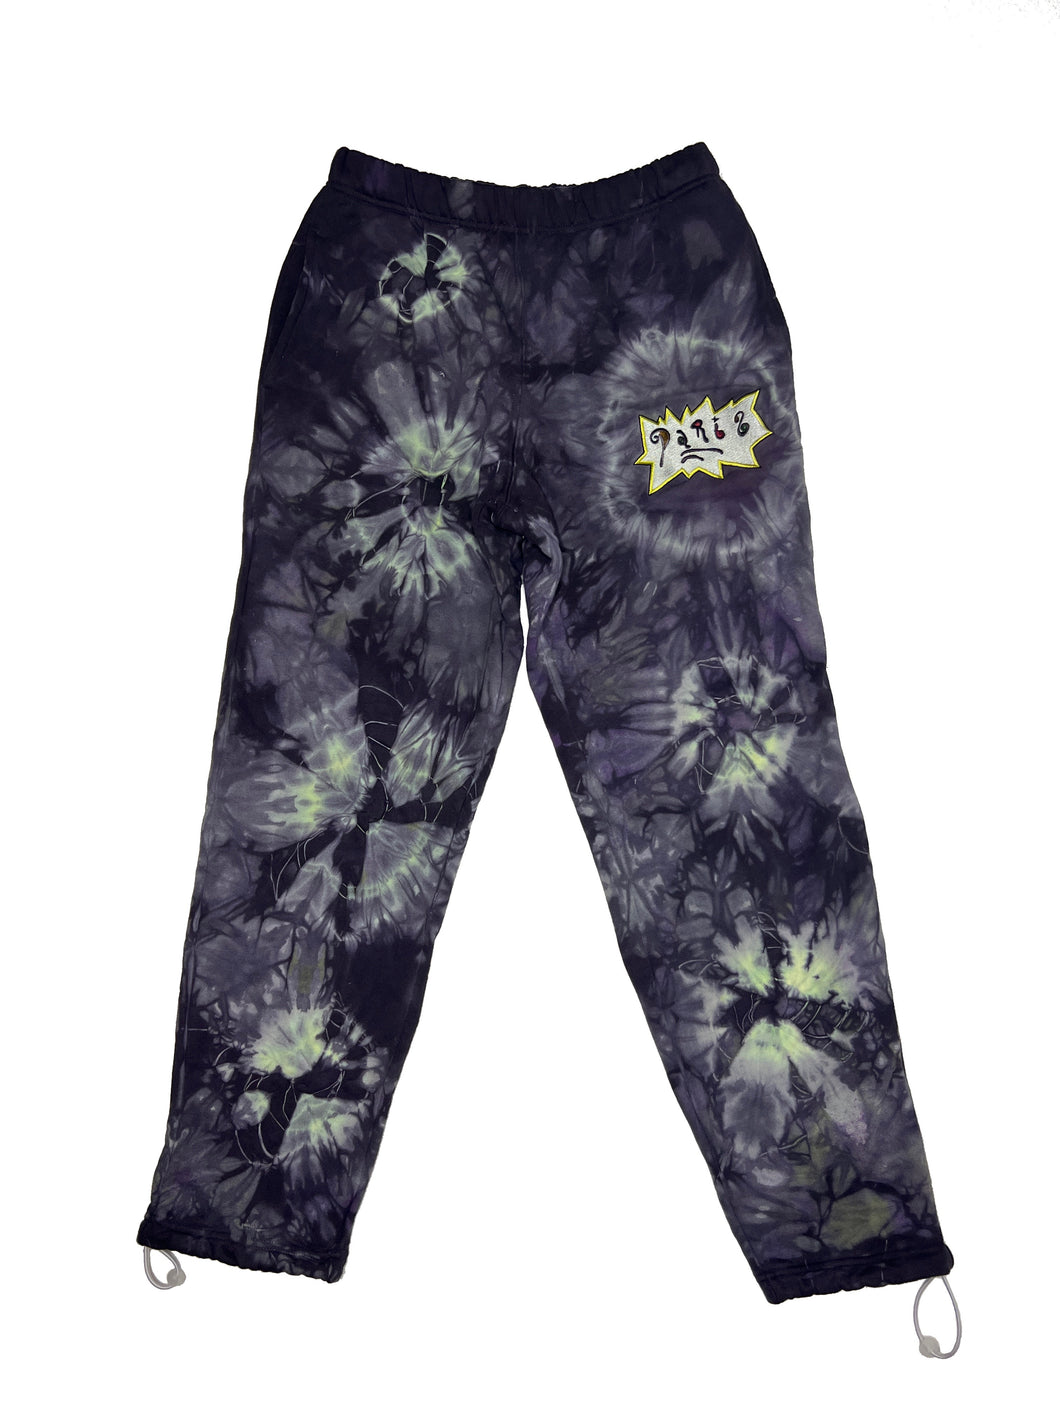 Paril x Knomad Hand Tie-Dyed Pants (Green)